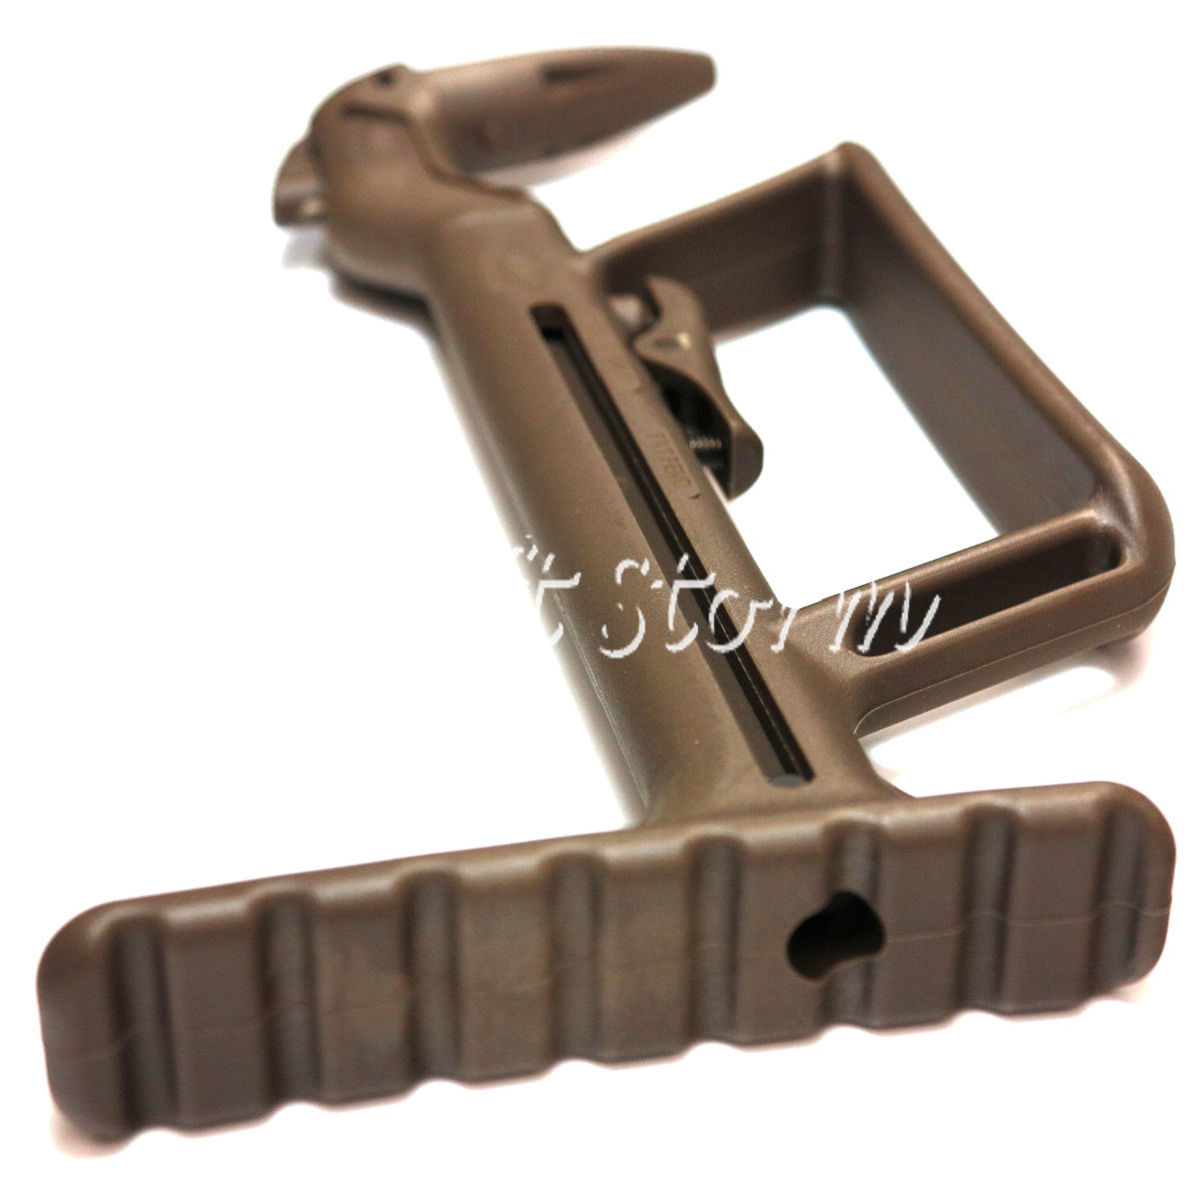 Airsoft Tactical Gear TAC Collapsible Stock for Glock 17/19 Series GBB Brown Tan